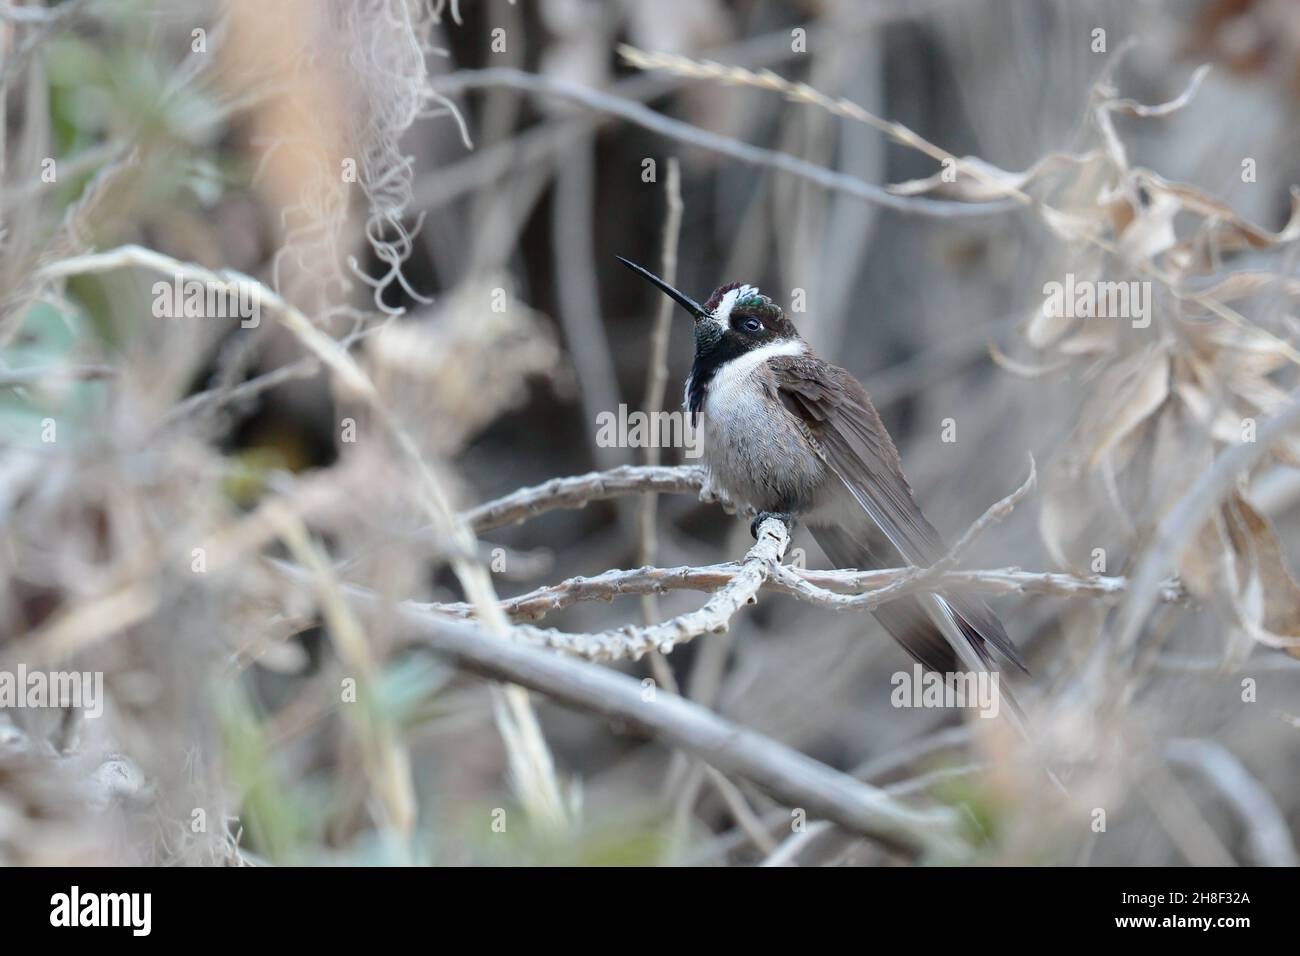 Bearded Mountaineer (Oreonympha nobilis), a beautiful specimen of a rare and unusual hummingbird to observe, in the photograph an adult specimen perch Stock Photo